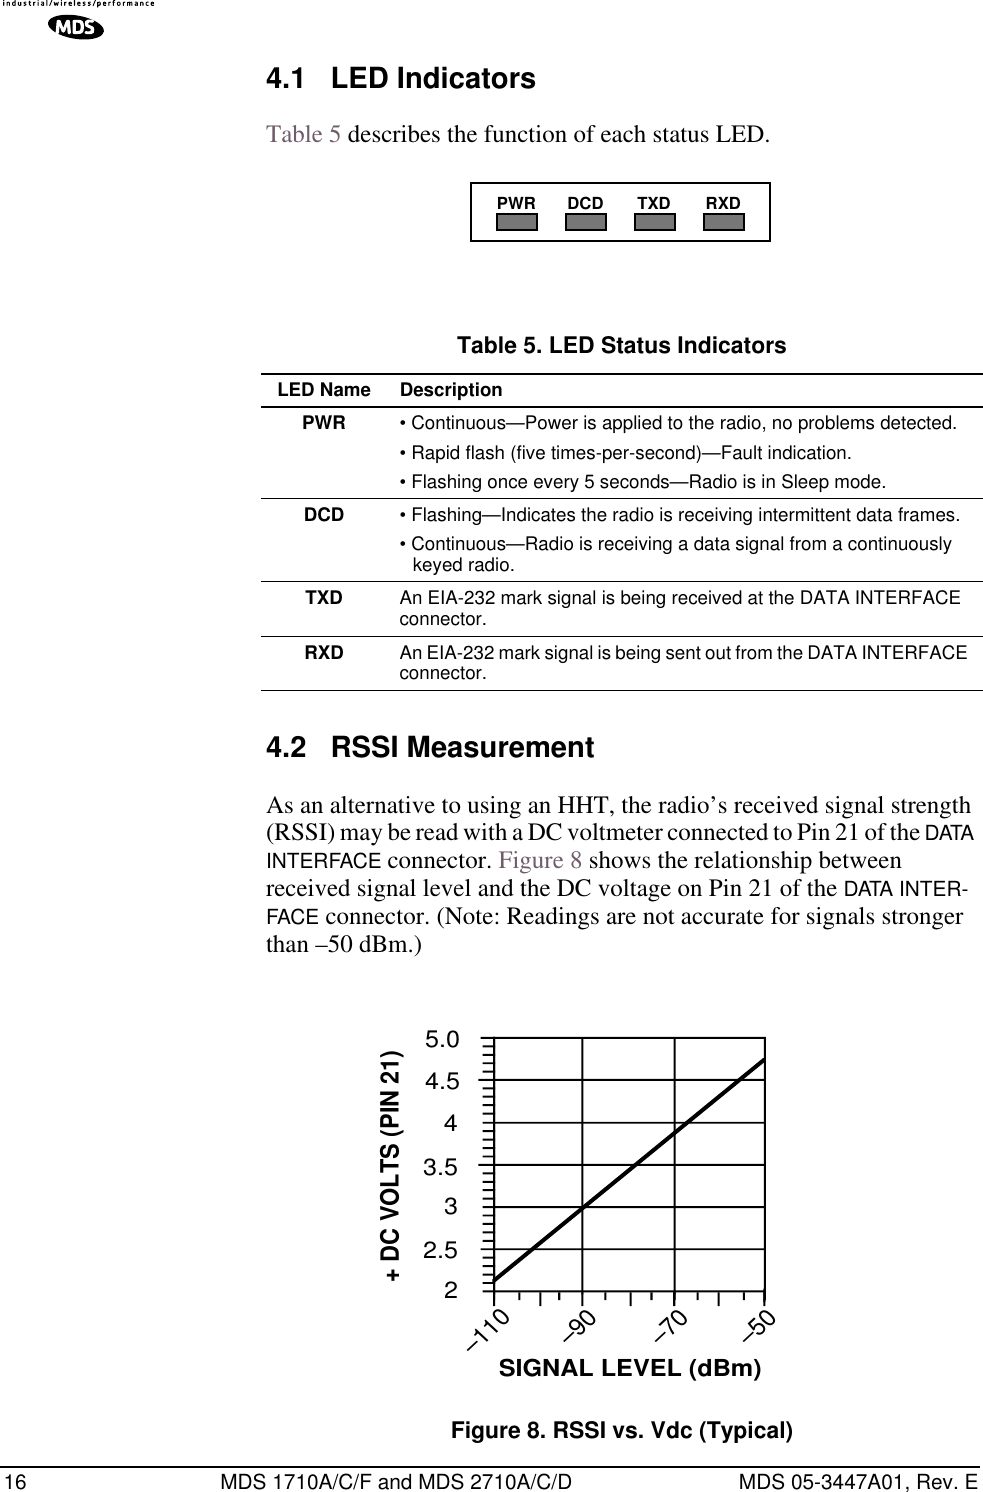 16 MDS 1710A/C/F and MDS 2710A/C/D MDS 05-3447A01, Rev. E4.1 LED IndicatorsTable 5 describes the function of each status LED.4.2 RSSI MeasurementAs an alternative to using an HHT, the radio’s received signal strength (RSSI) may be read with a DC voltmeter connected to Pin 21 of the DATA INTERFACE connector. Figure 8 shows the relationship between received signal level and the DC voltage on Pin 21 of the DATA INTER-FACE connector. (Note: Readings are not accurate for signals stronger than –50 dBm.)Invisible place holderFigure 8. RSSI vs. Vdc (Typical)PWR DCD TXD RXDTable 5. LED Status Indicators LED Name DescriptionPWR • Continuous—Power is applied to the radio, no problems detected.• Rapid flash (five times-per-second)—Fault indication.• Flashing once every 5 seconds—Radio is in Sleep mode.DCD • Flashing—Indicates the radio is receiving intermittent data frames.• Continuous—Radio is receiving a data signal from a continuously keyed radio.TXD An EIA-232 mark signal is being received at the DATA INTERFACE connector.RXD An EIA-232 mark signal is being sent out from the DATA INTERFACE connector.22.533.54–110–90–70–50+ DC VOLTS (PIN 21)SIGNAL LEVEL (dBm)4.55.0